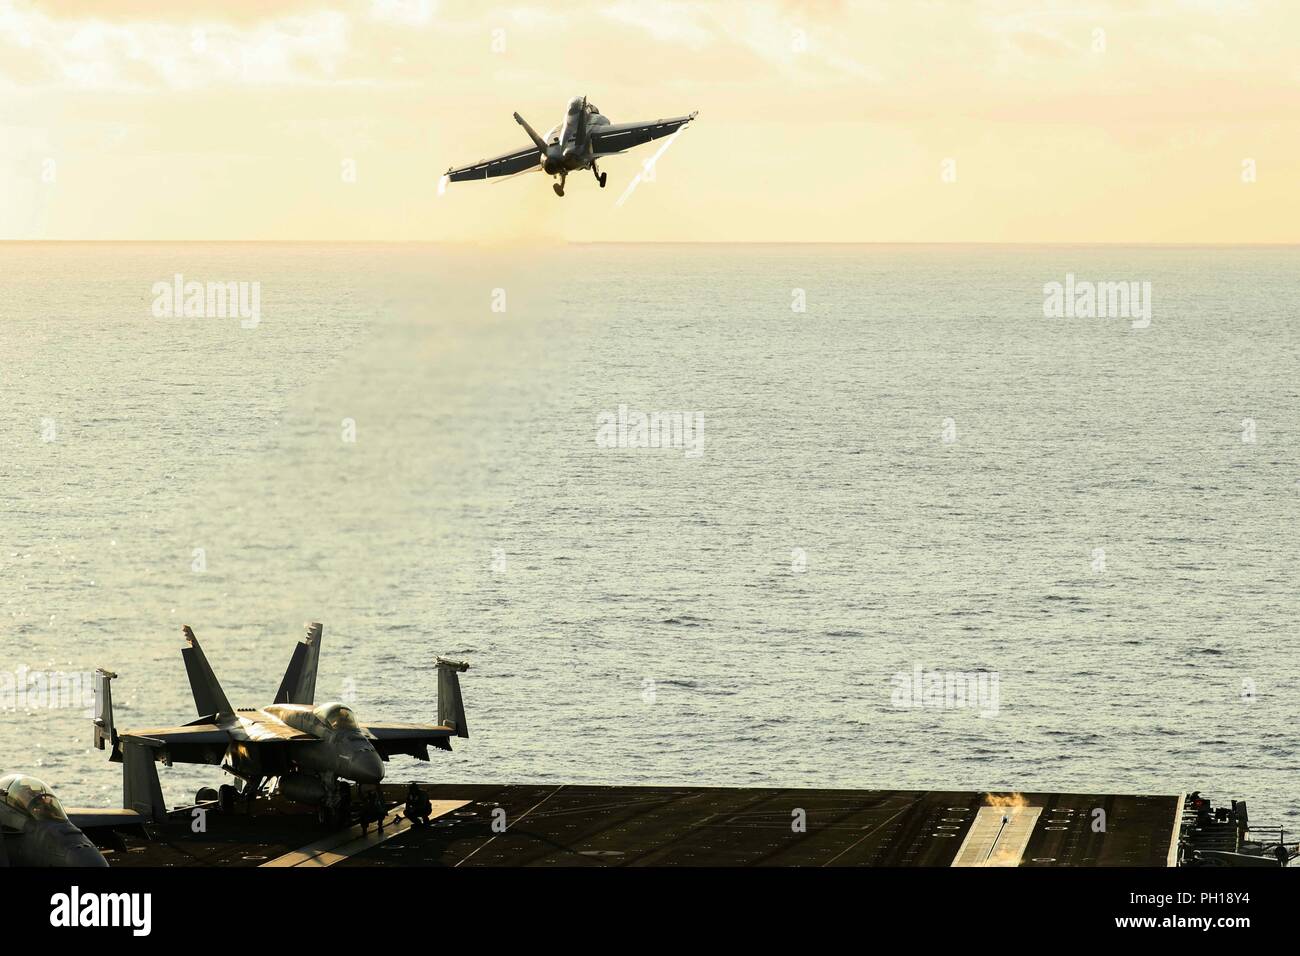 180824-N-FB291-1264 ATLANTIC OCEAN (Aug. 24, 2018) An F/A 18C Super Hornet from the Jolly Rogers of Strike Fighter Squadron (VFA) 200  launches from the flight deck of the Nimitz-class aircraft carrier USS Abraham Lincoln (CVN 72). (U.S. Navy photo by Mass Communication Specialist 3rd Class Garrett LaBarge/Released) Stock Photo